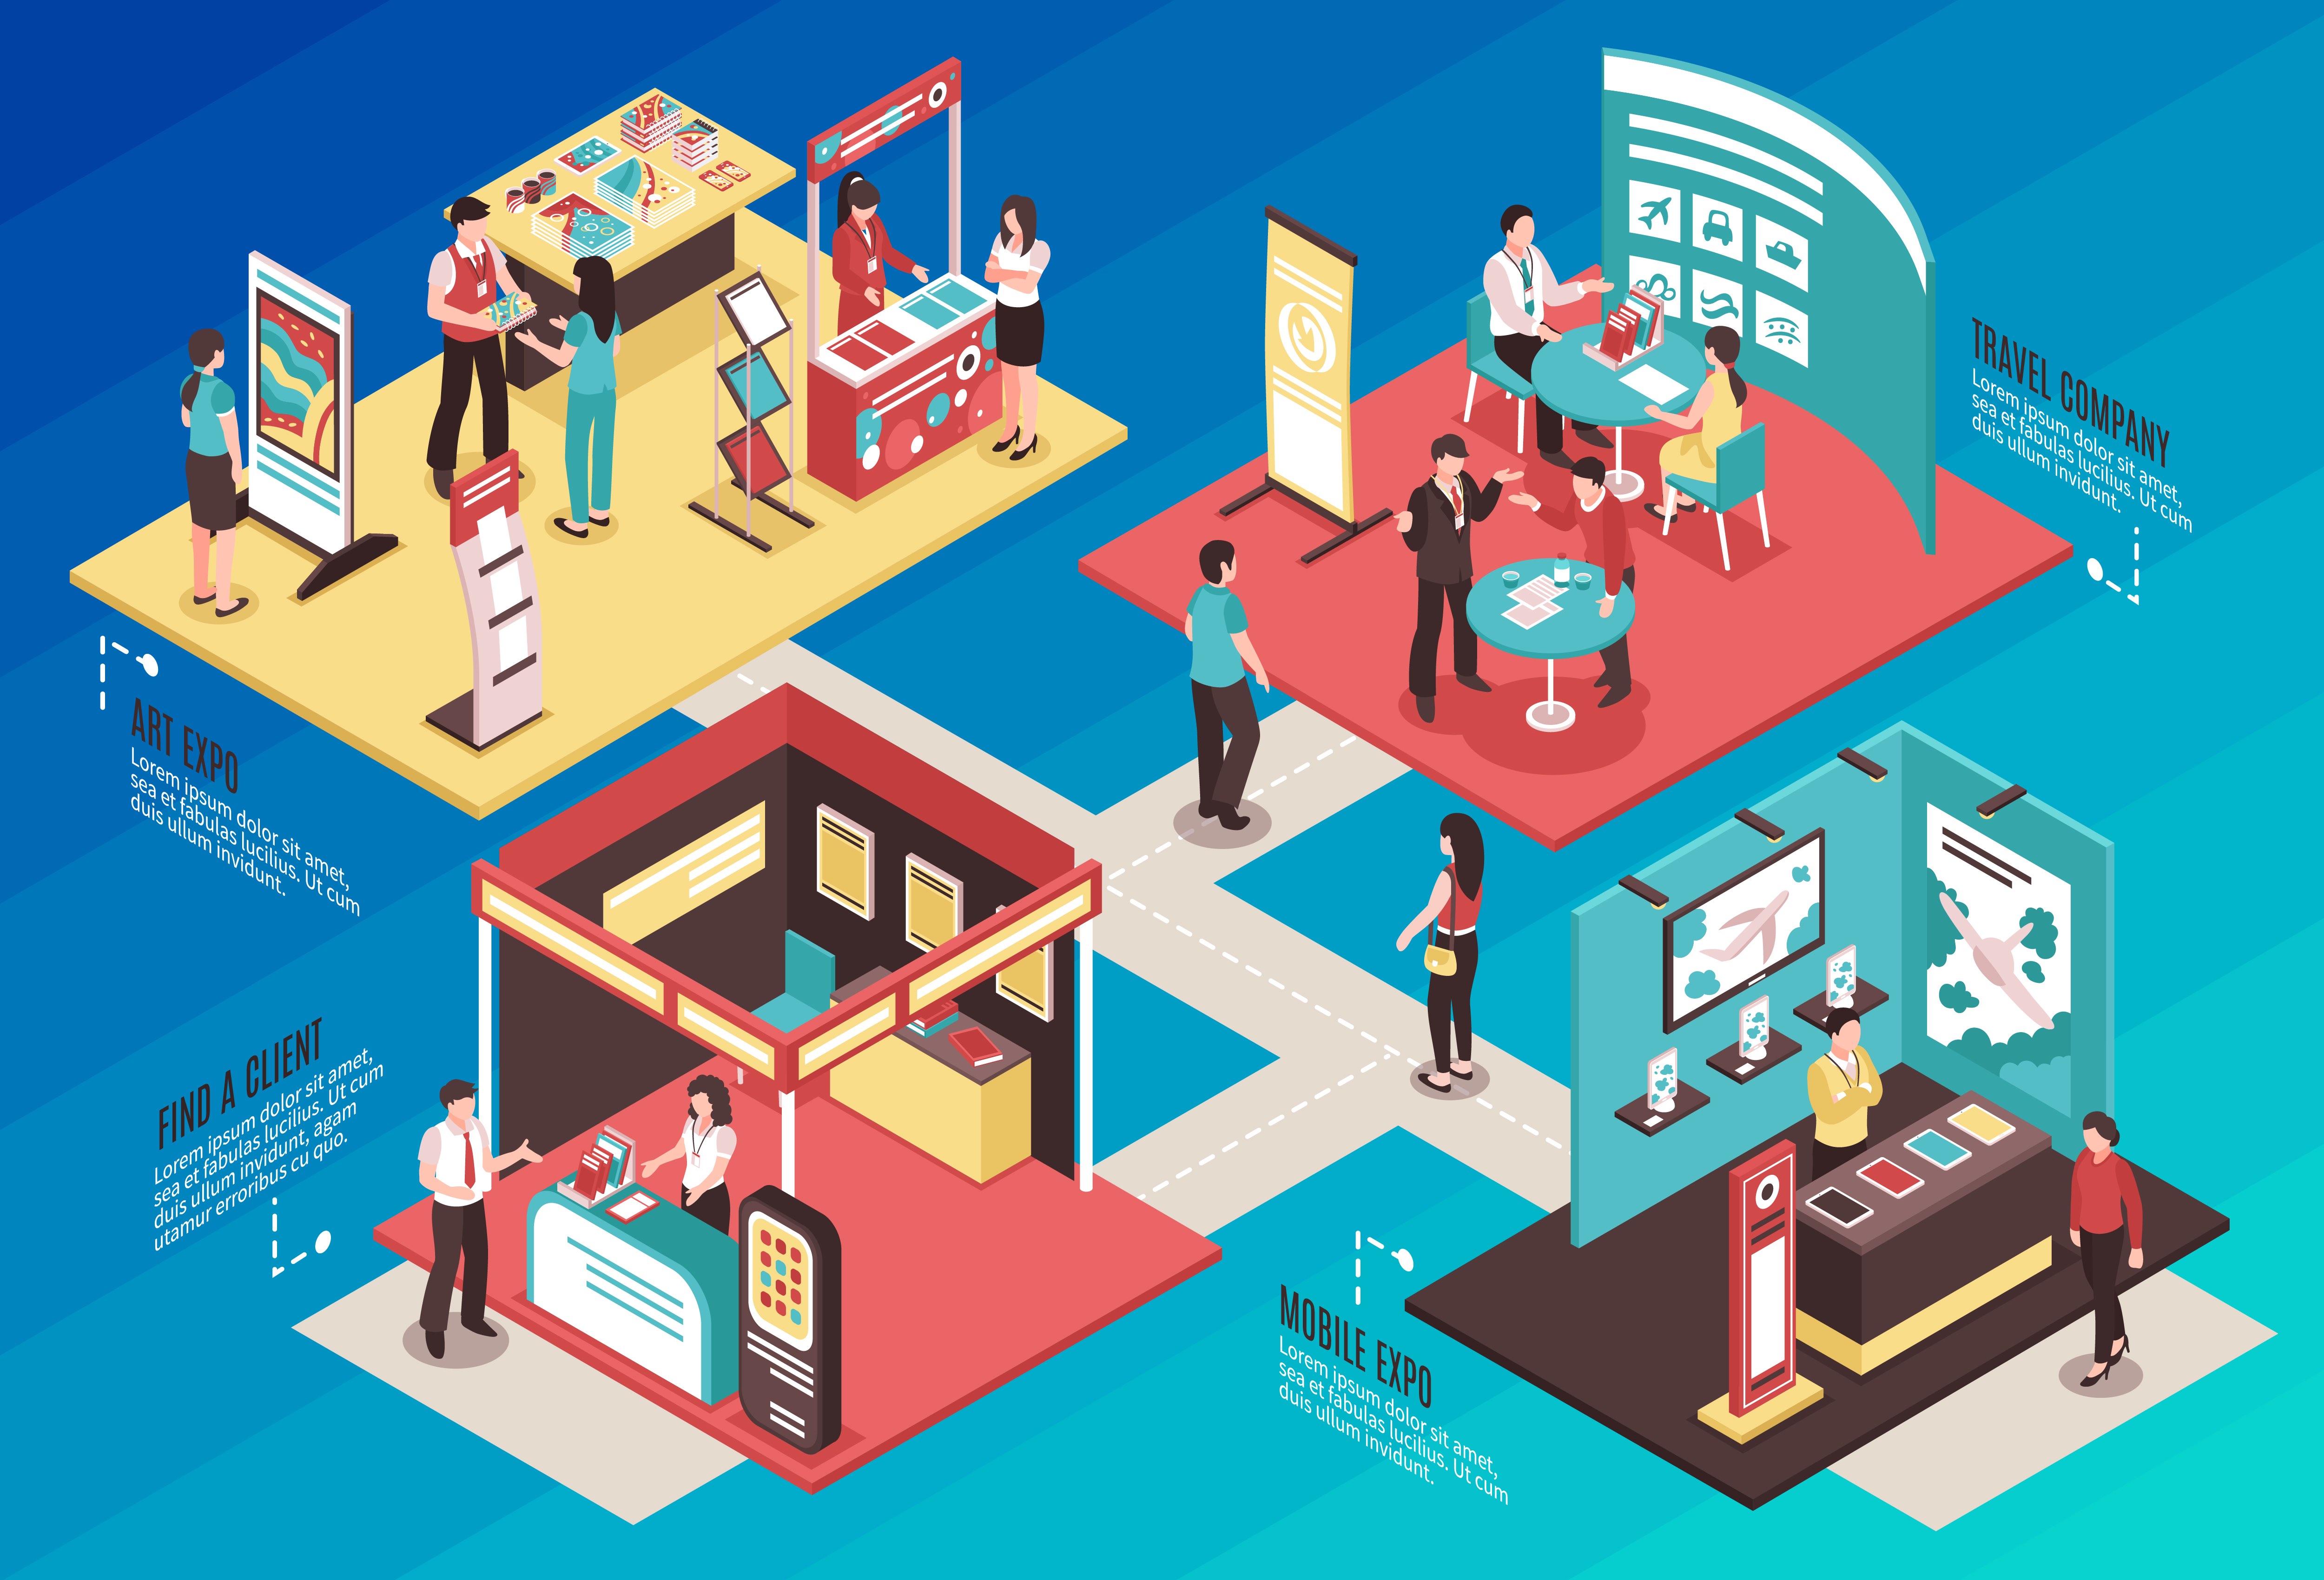 5 Exhibition Stand Tips That Will Attracts and Engages Visitors